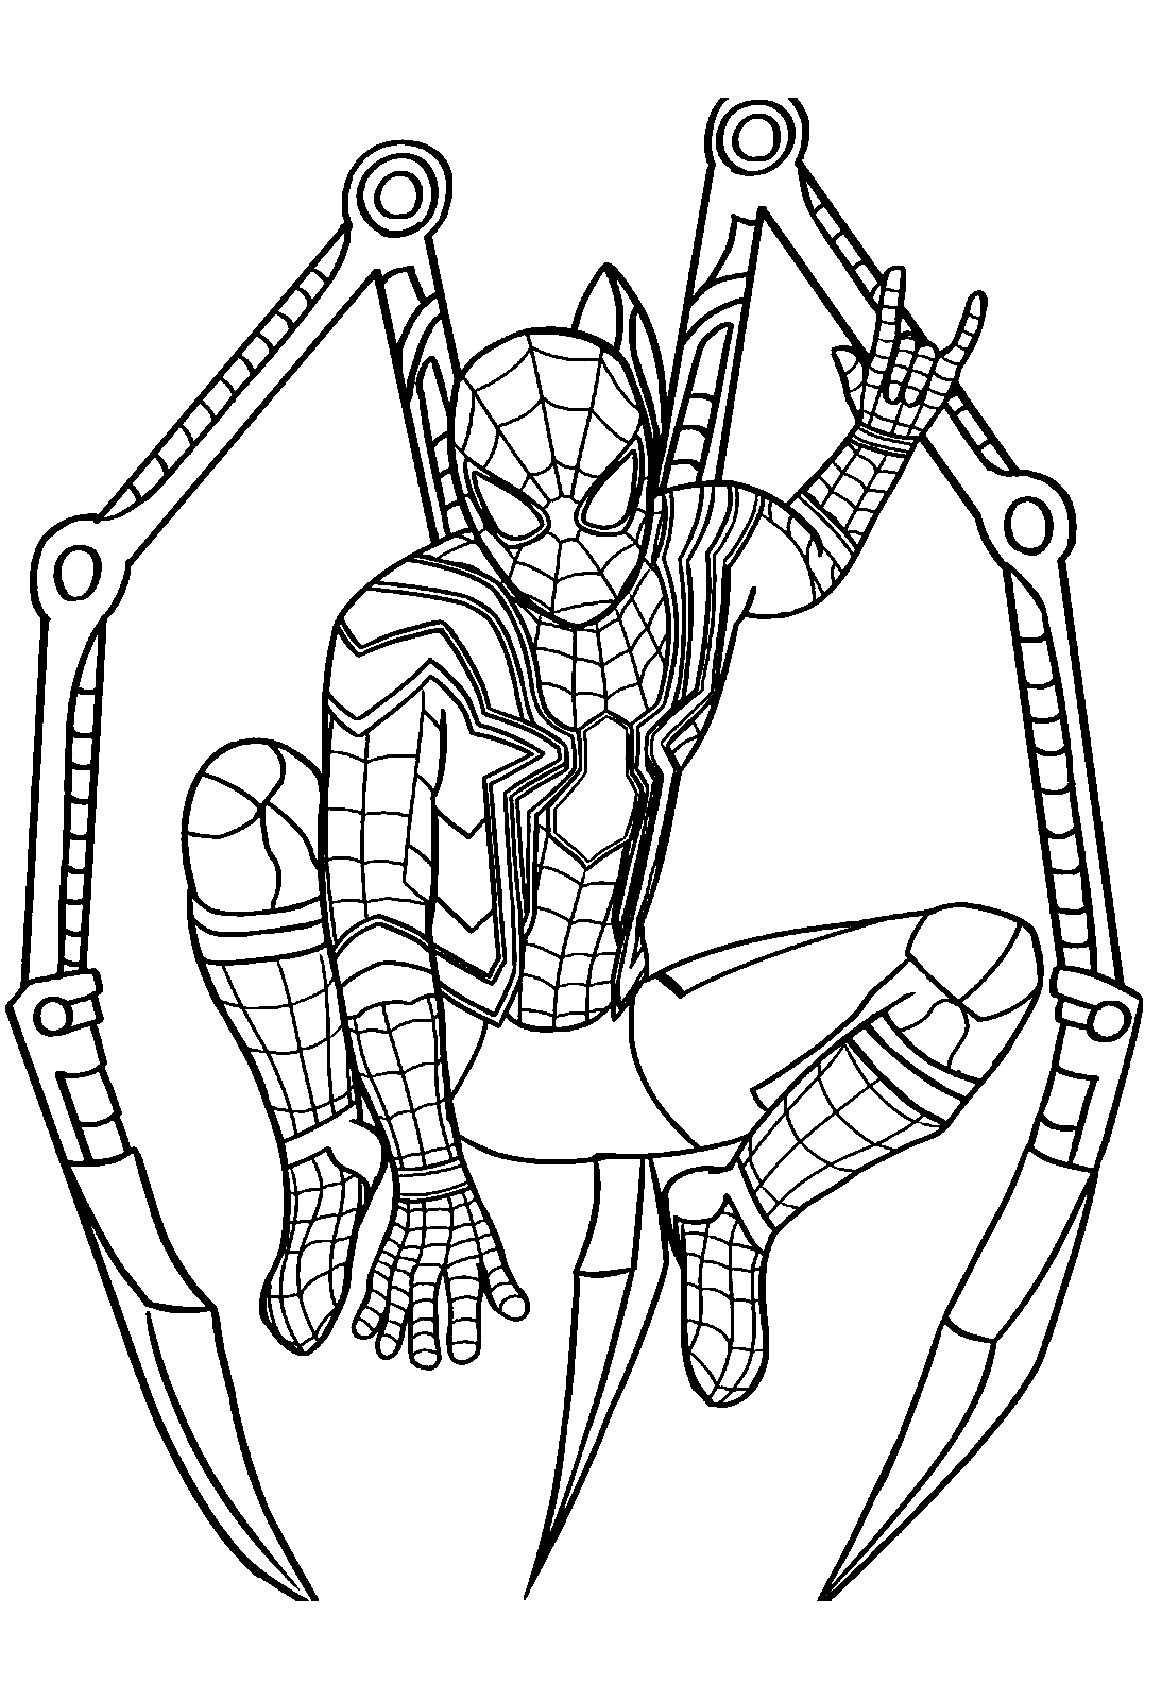 Printable Iron Spiderman Coloring Page for Adults